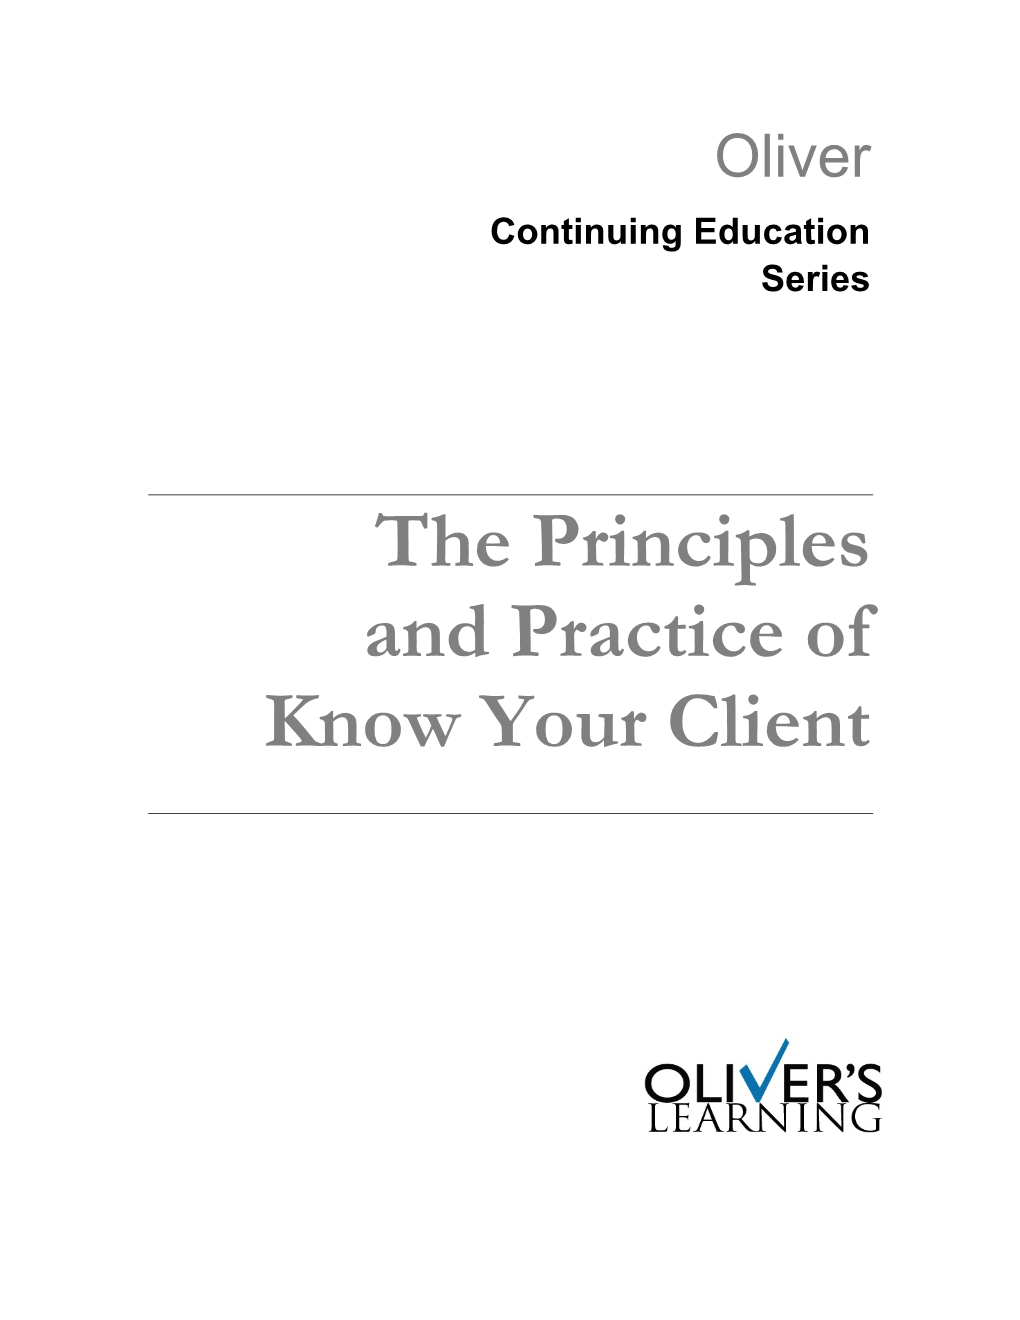 The Principles and Practice of Know Your Client